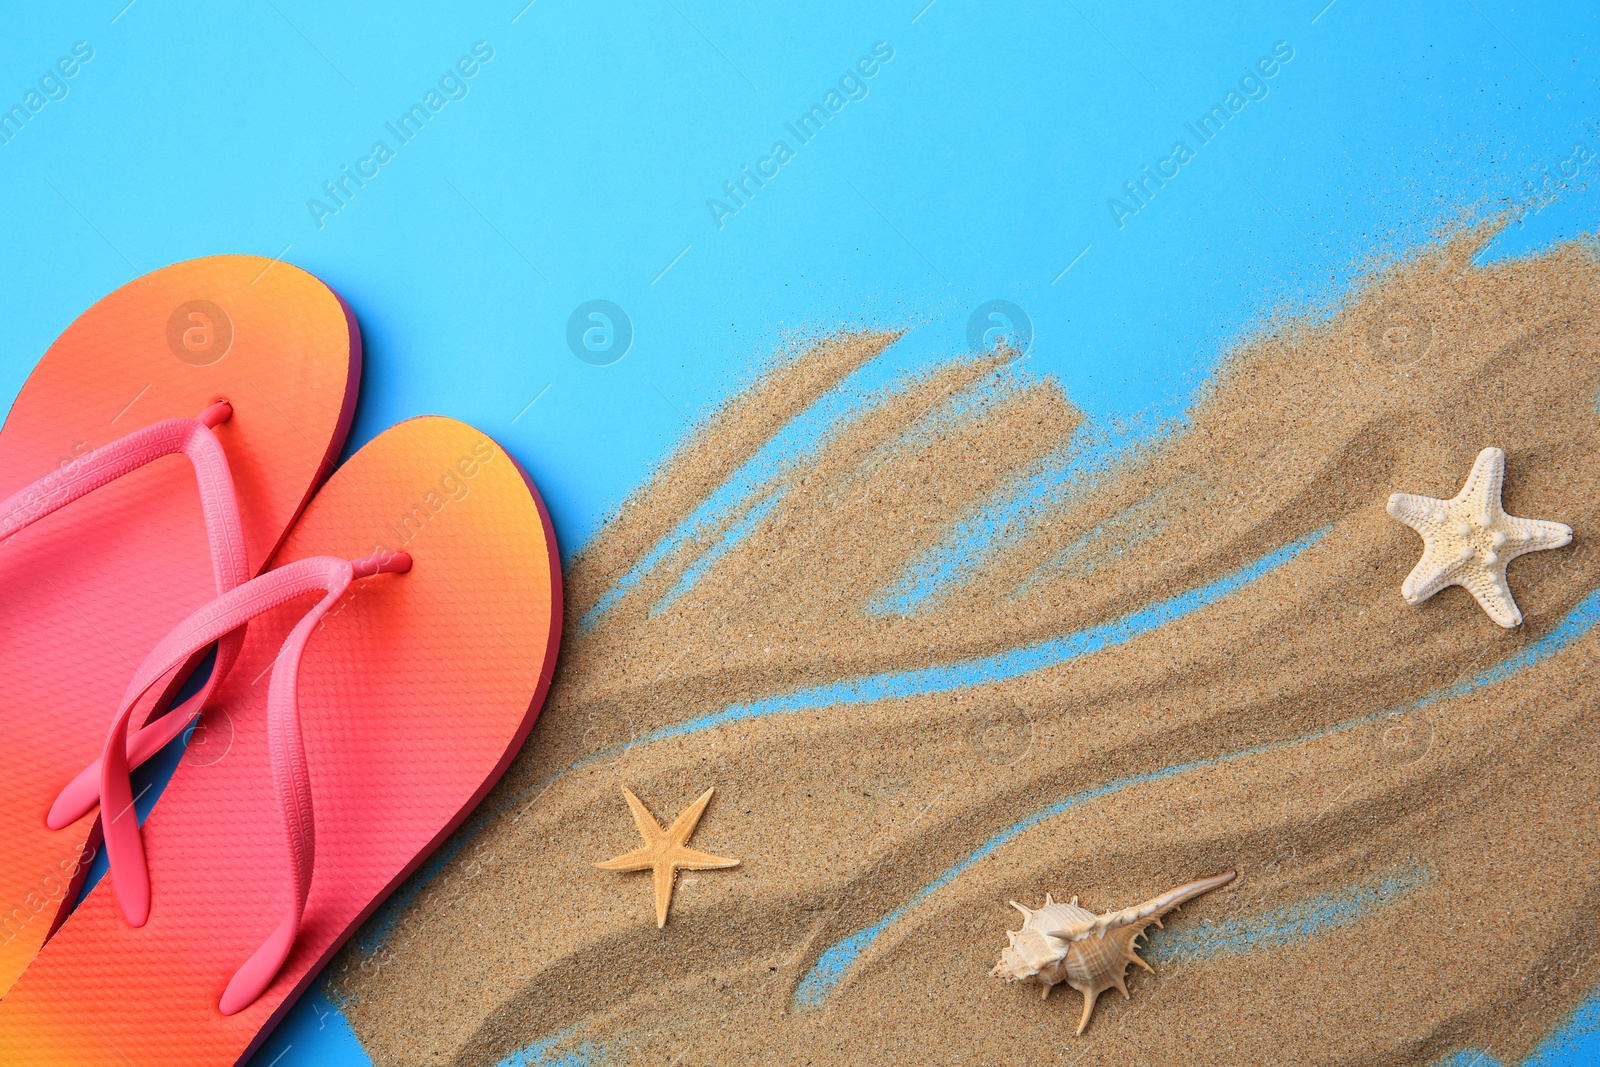 Photo of Flip flops and sand on light blue background, flat lay. Beach accessories